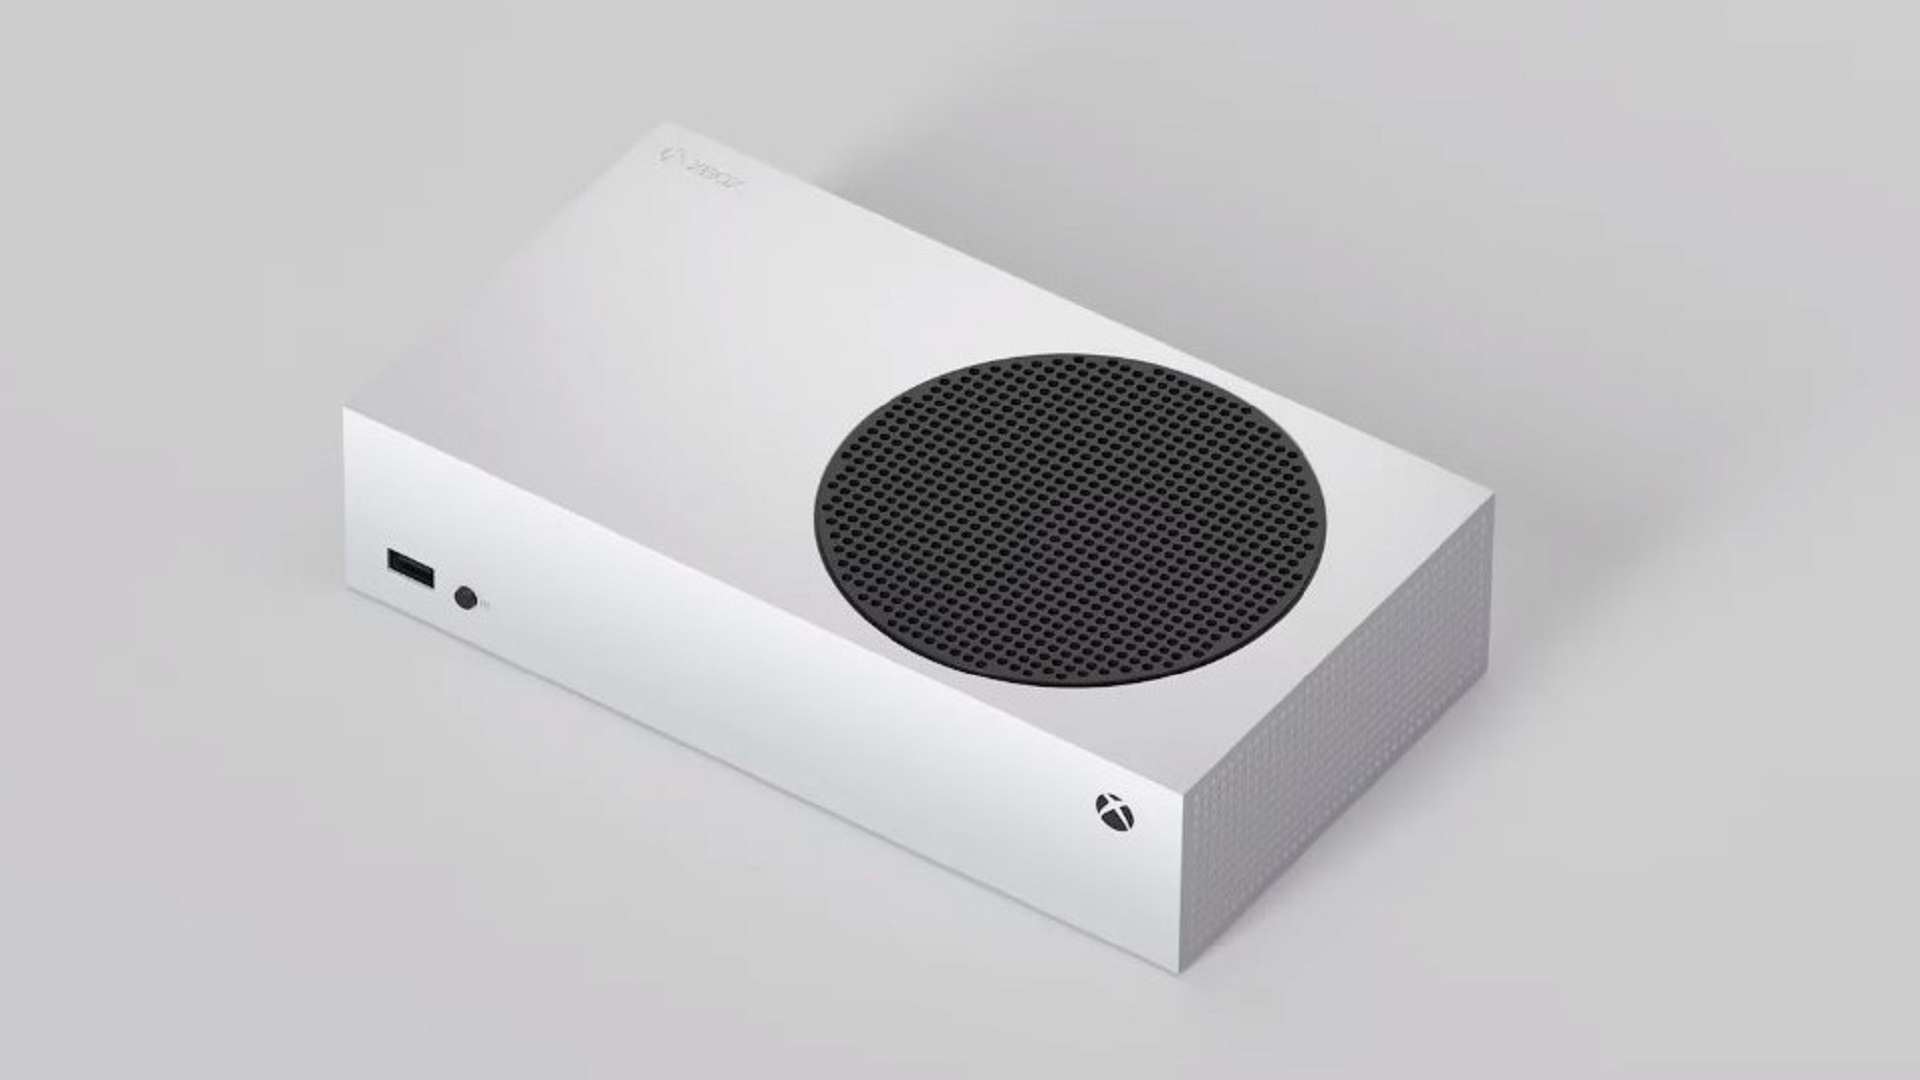 Xbox Series S Specs Revealed: 1440p/120 FPS, Raytracing, More [Updated] -  IGN